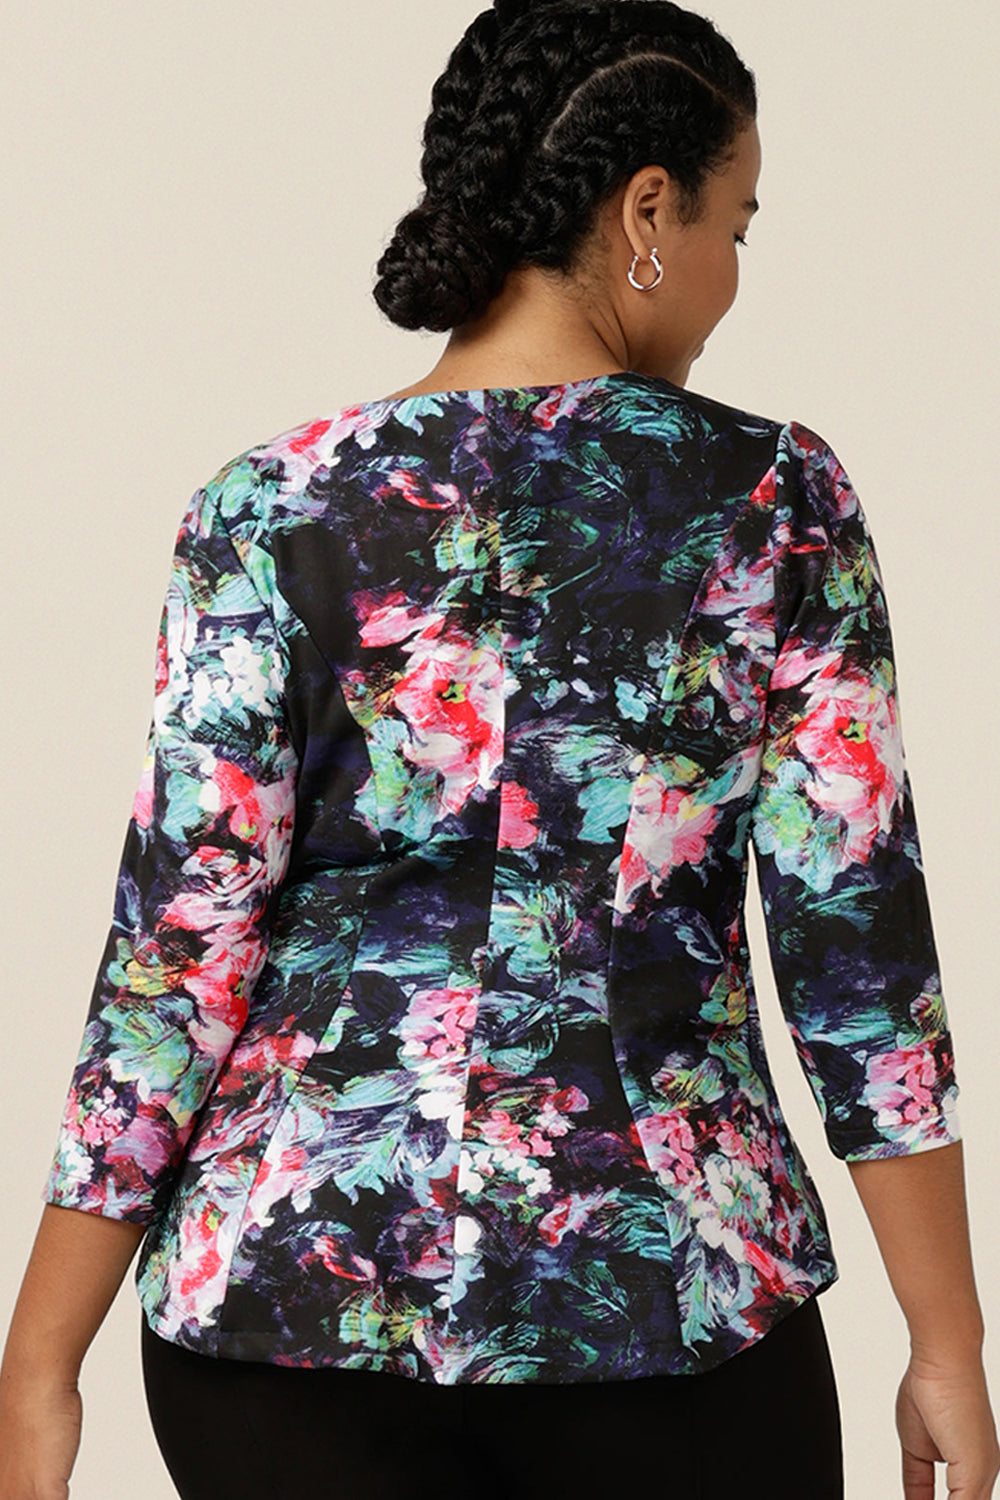 Back view of a soft tailoring top, by Australian and New Zealand women's clothing label, L&F, the Saxon Top has a round neckline, 3/4 sleeves and tailored panelling. The stretch scuba fabric makes it a comfortable work top for sizes 8 to sizes 24. Shop now with free shipping to New Zealand.